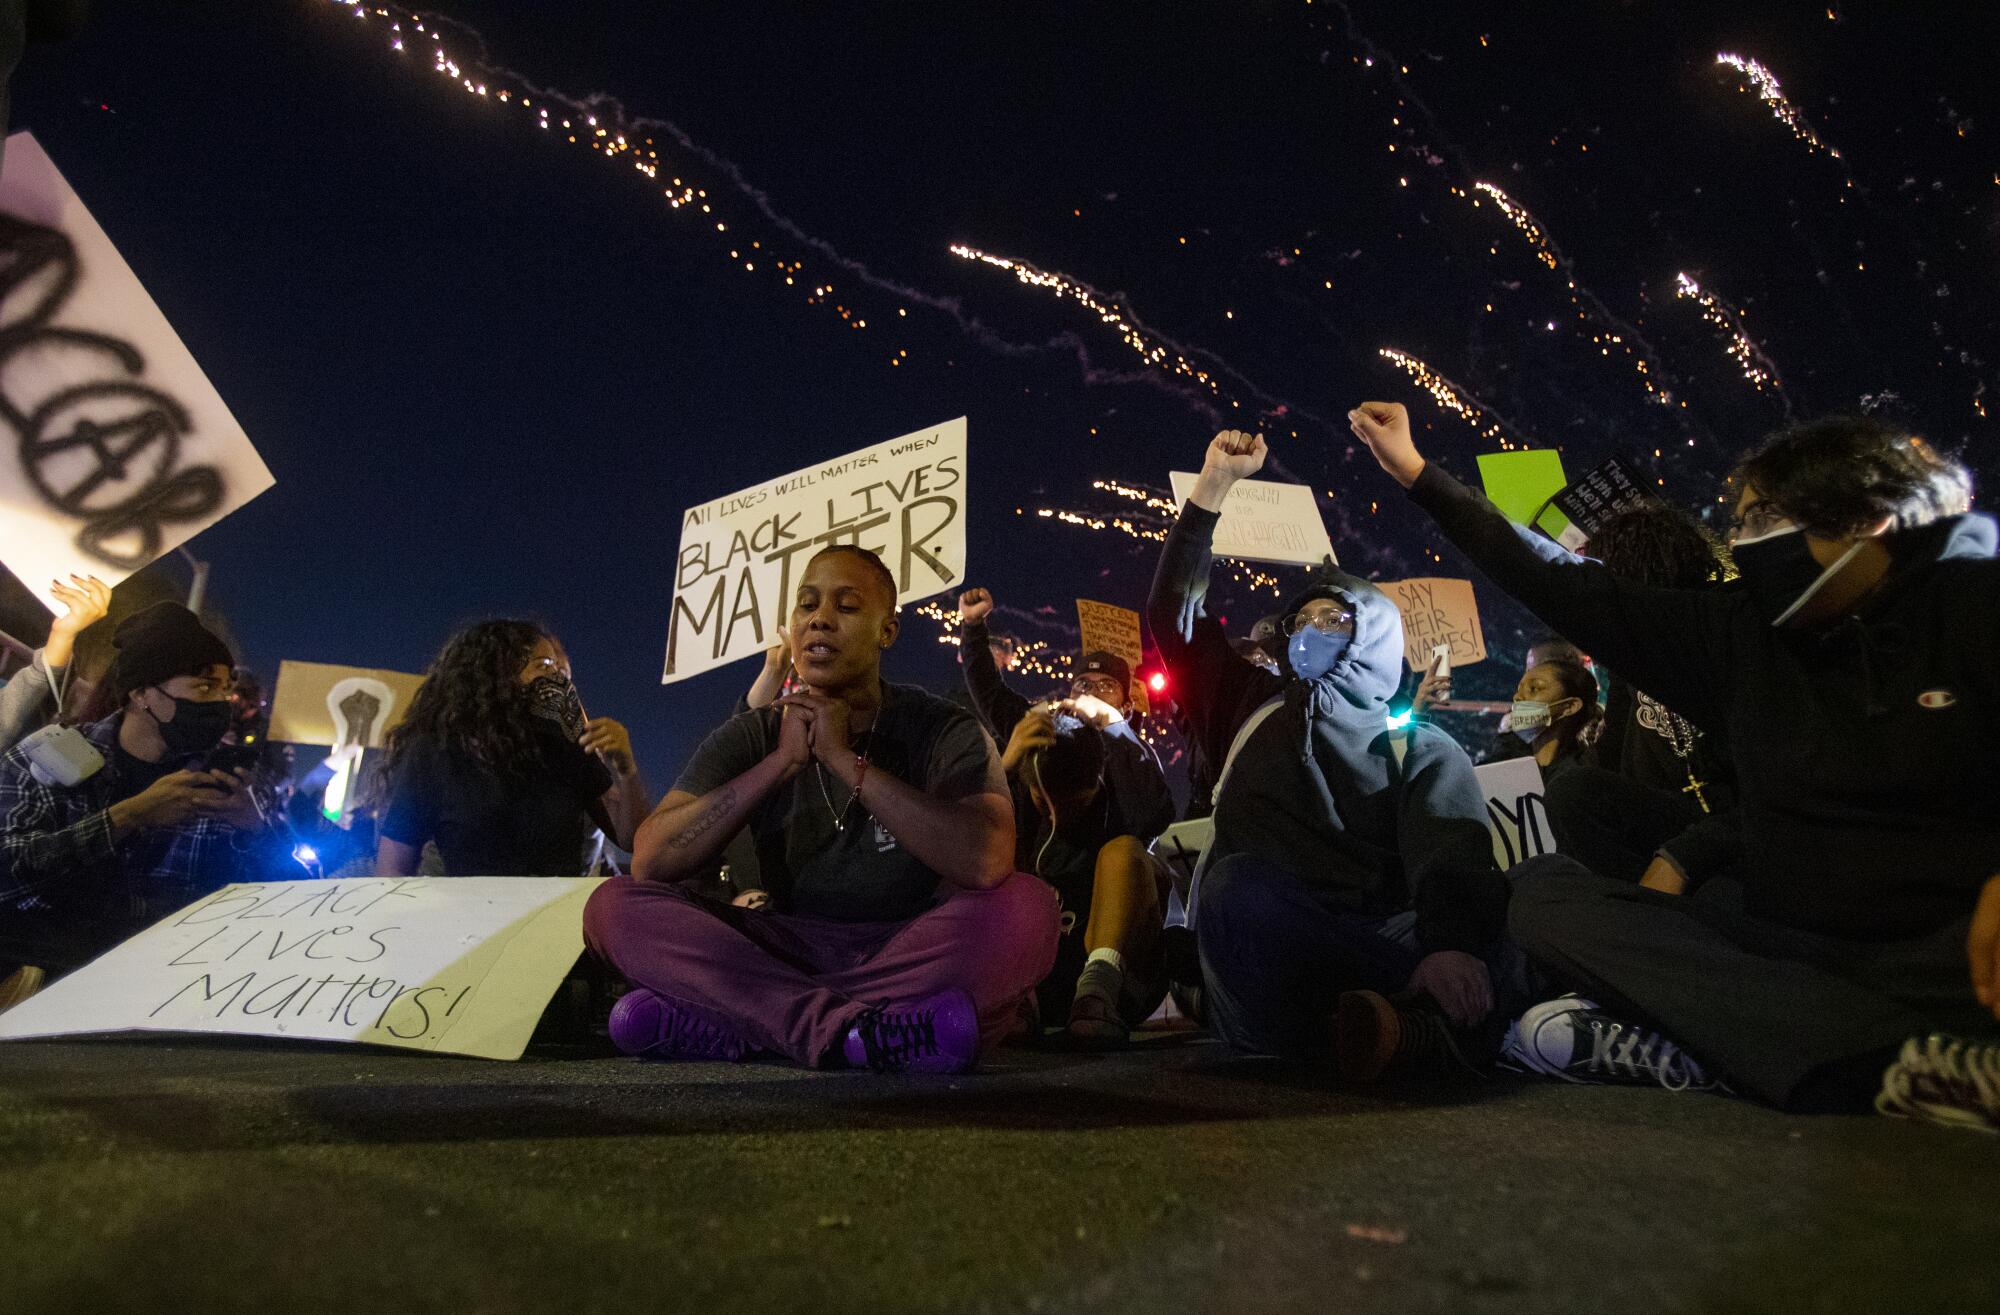 As fireworks explode in the background, Michelle Usher of Santa Ana, middle, prays in the street.